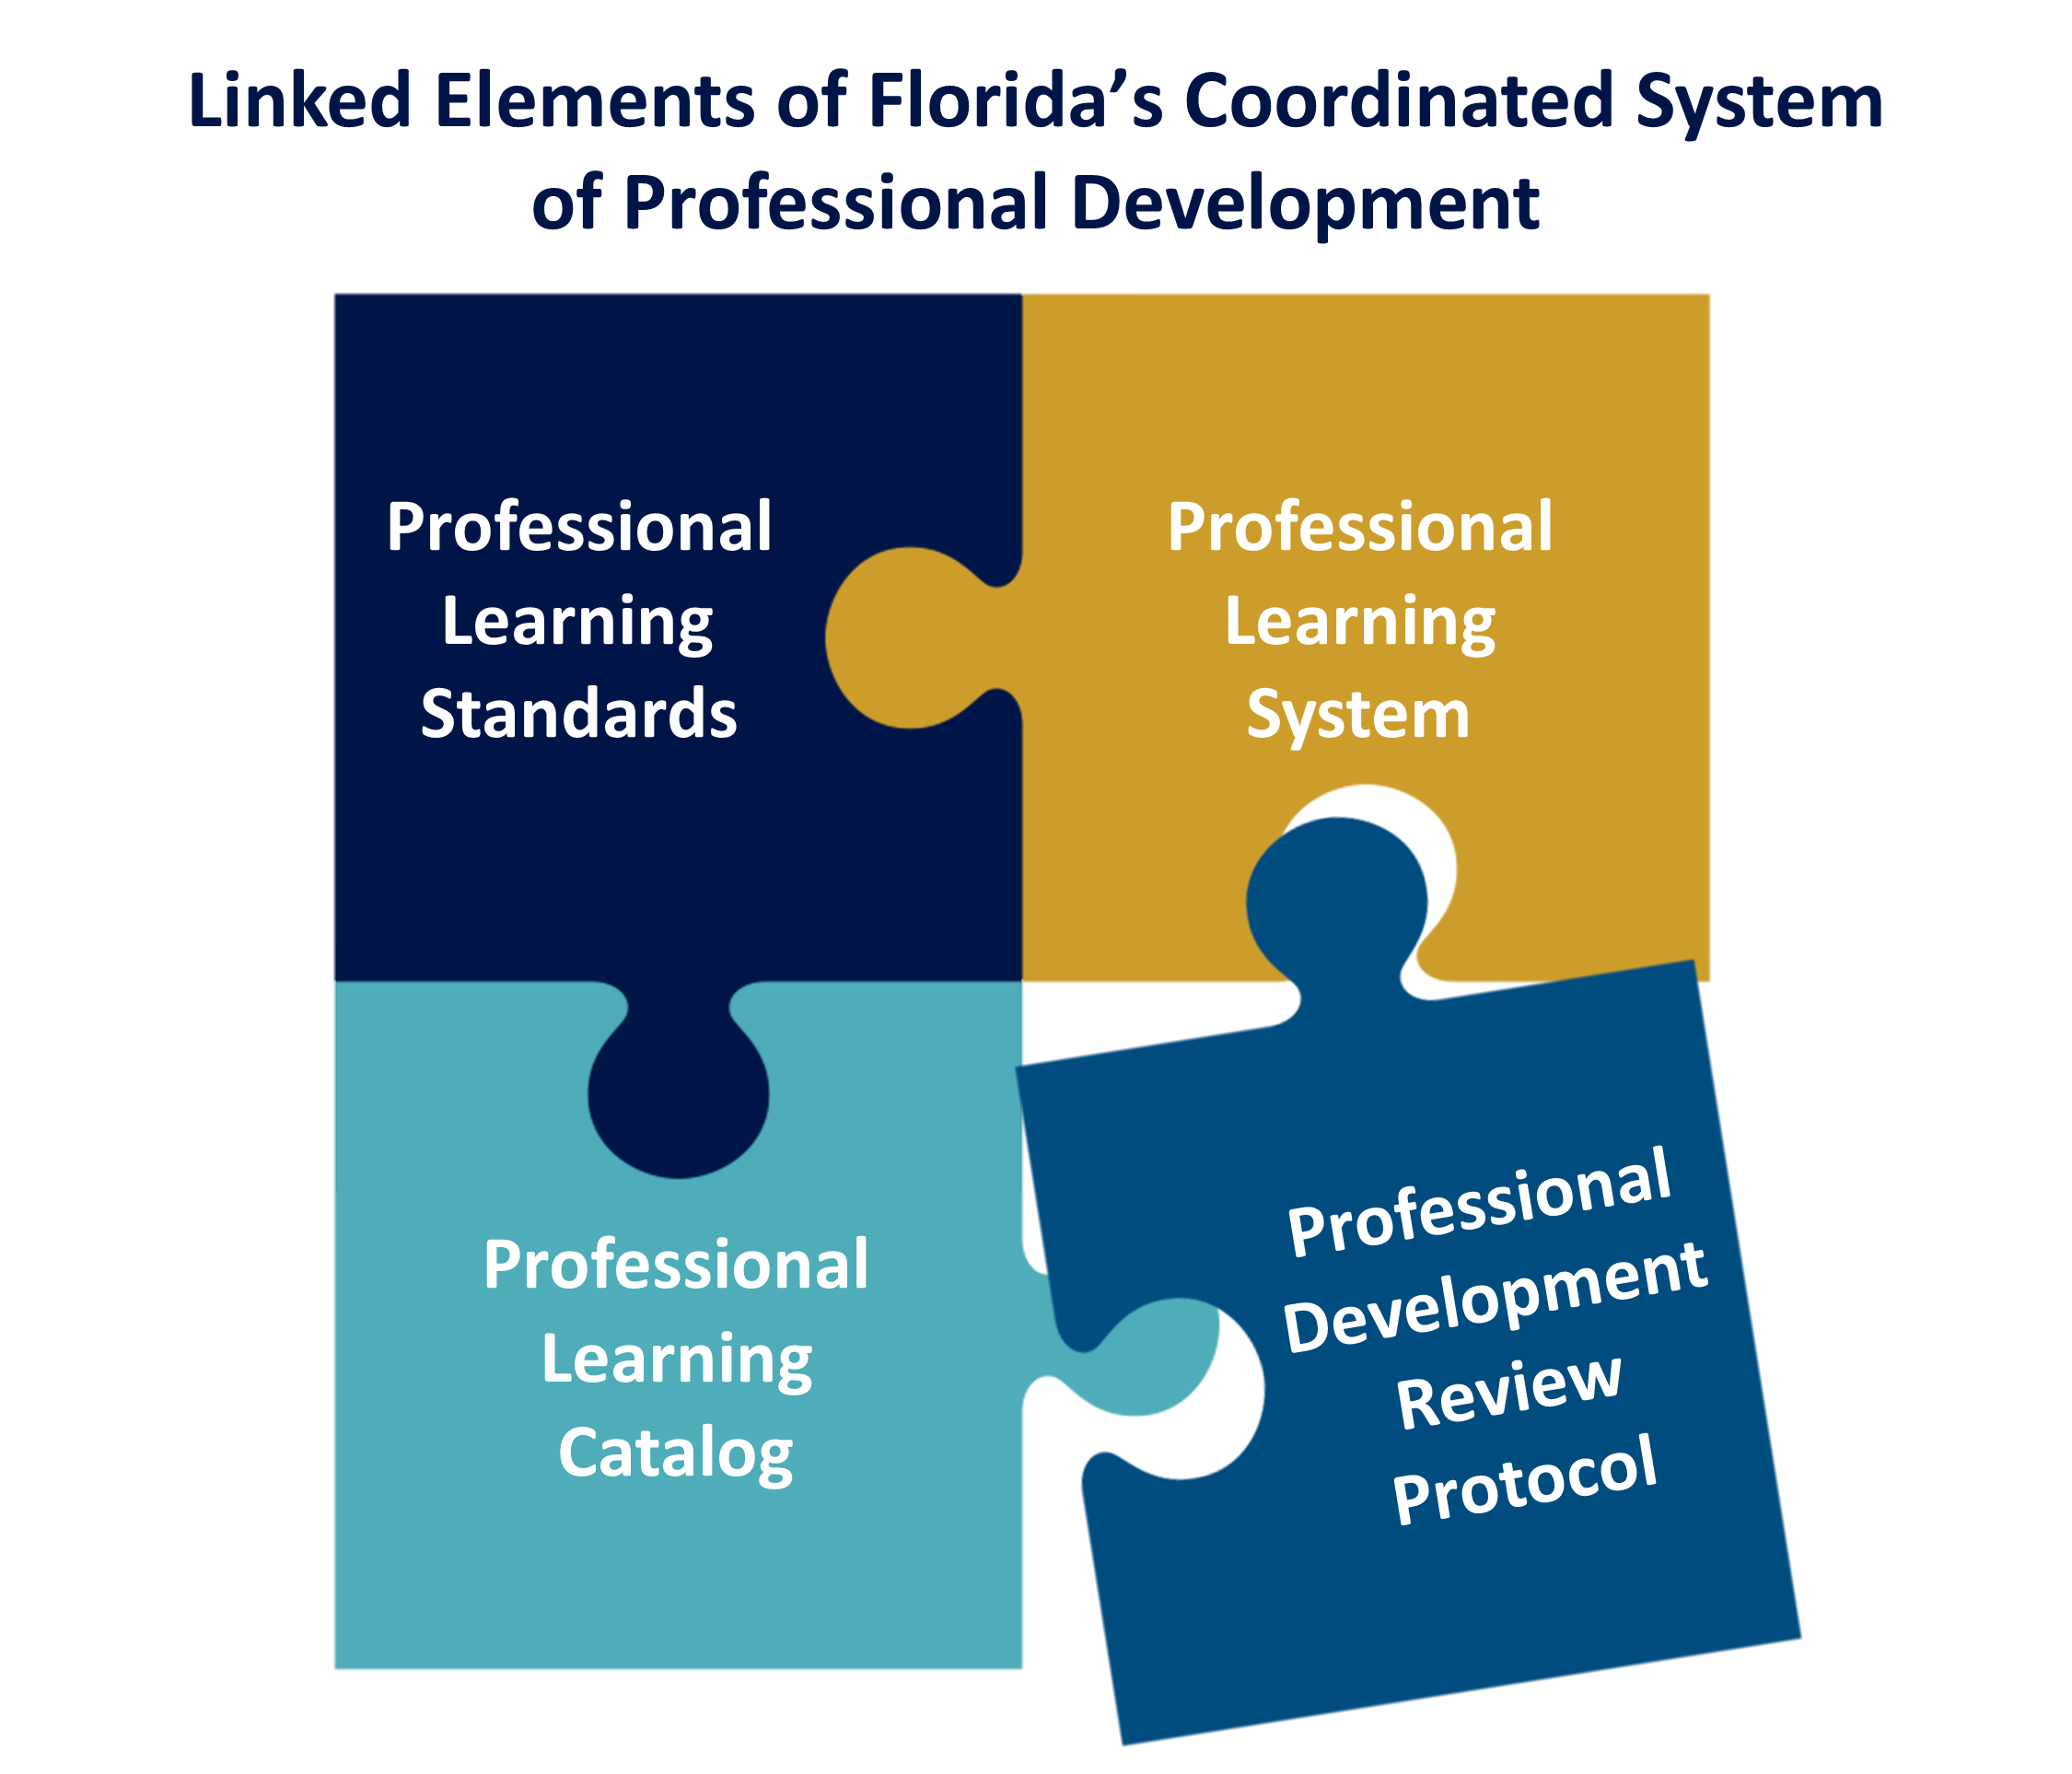 Linked Elements of Florida’s Coordinated Systems of Professional Development. There are four puzzle pieces being put together with the different system names on them. The top left is Professional Learning Standards, the top right is Professional Learning System, the bottom left is Professional Learning Catalog, and the bottom right is Professional Development Review Protocol.